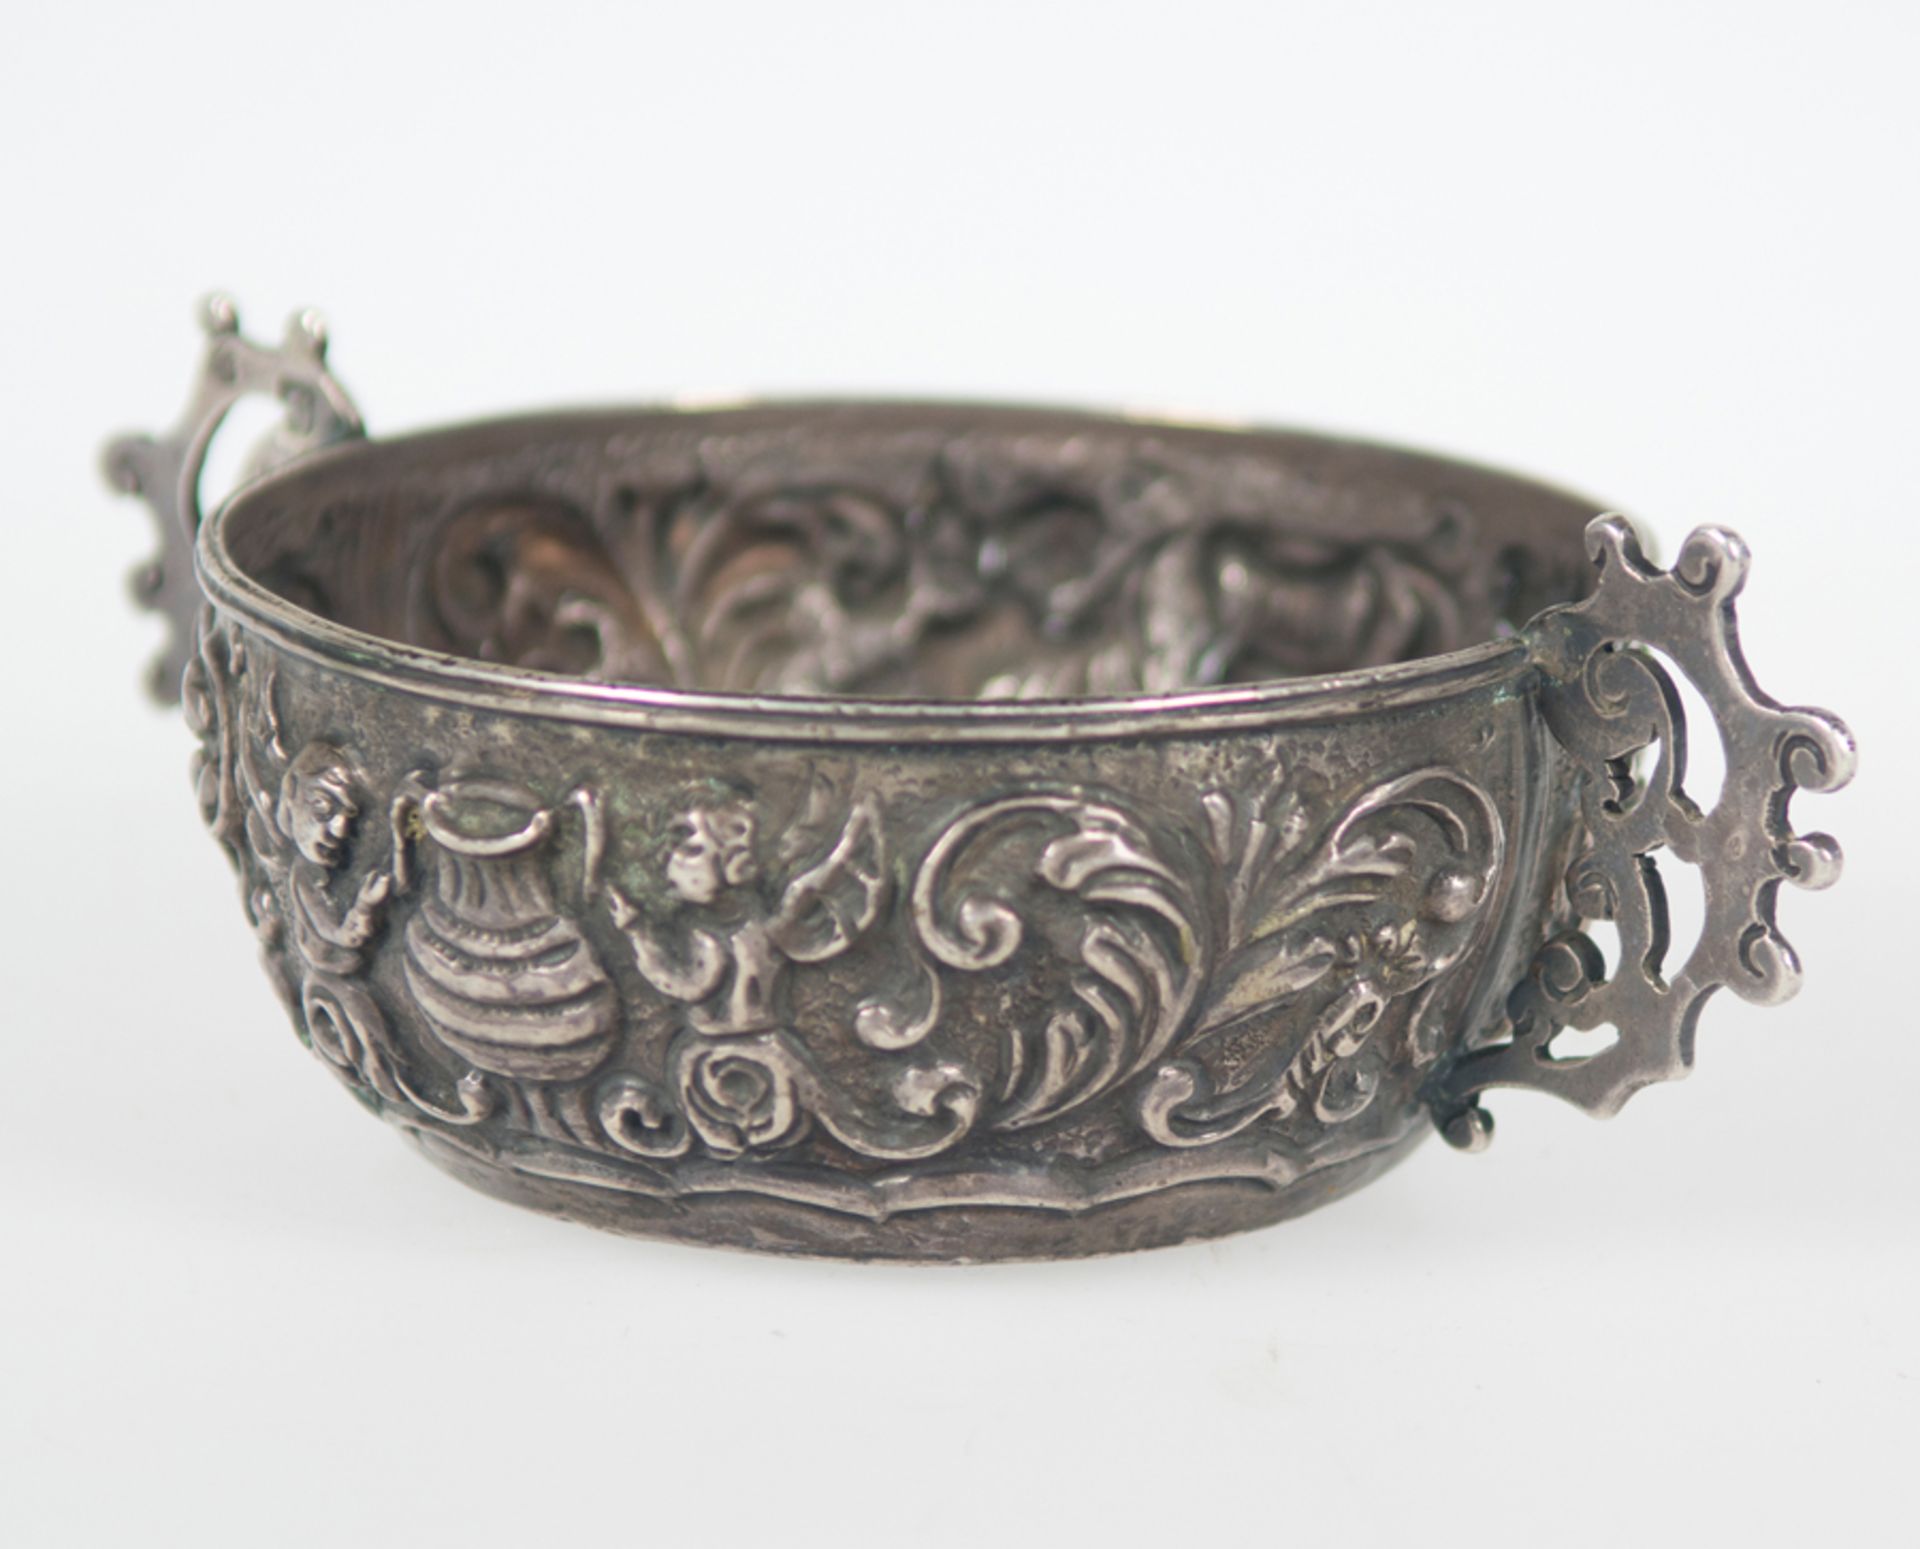 Important embossed and marked silver wine tasting cup. Viceregal or Novohispanic work. 18th Century. - Image 4 of 5